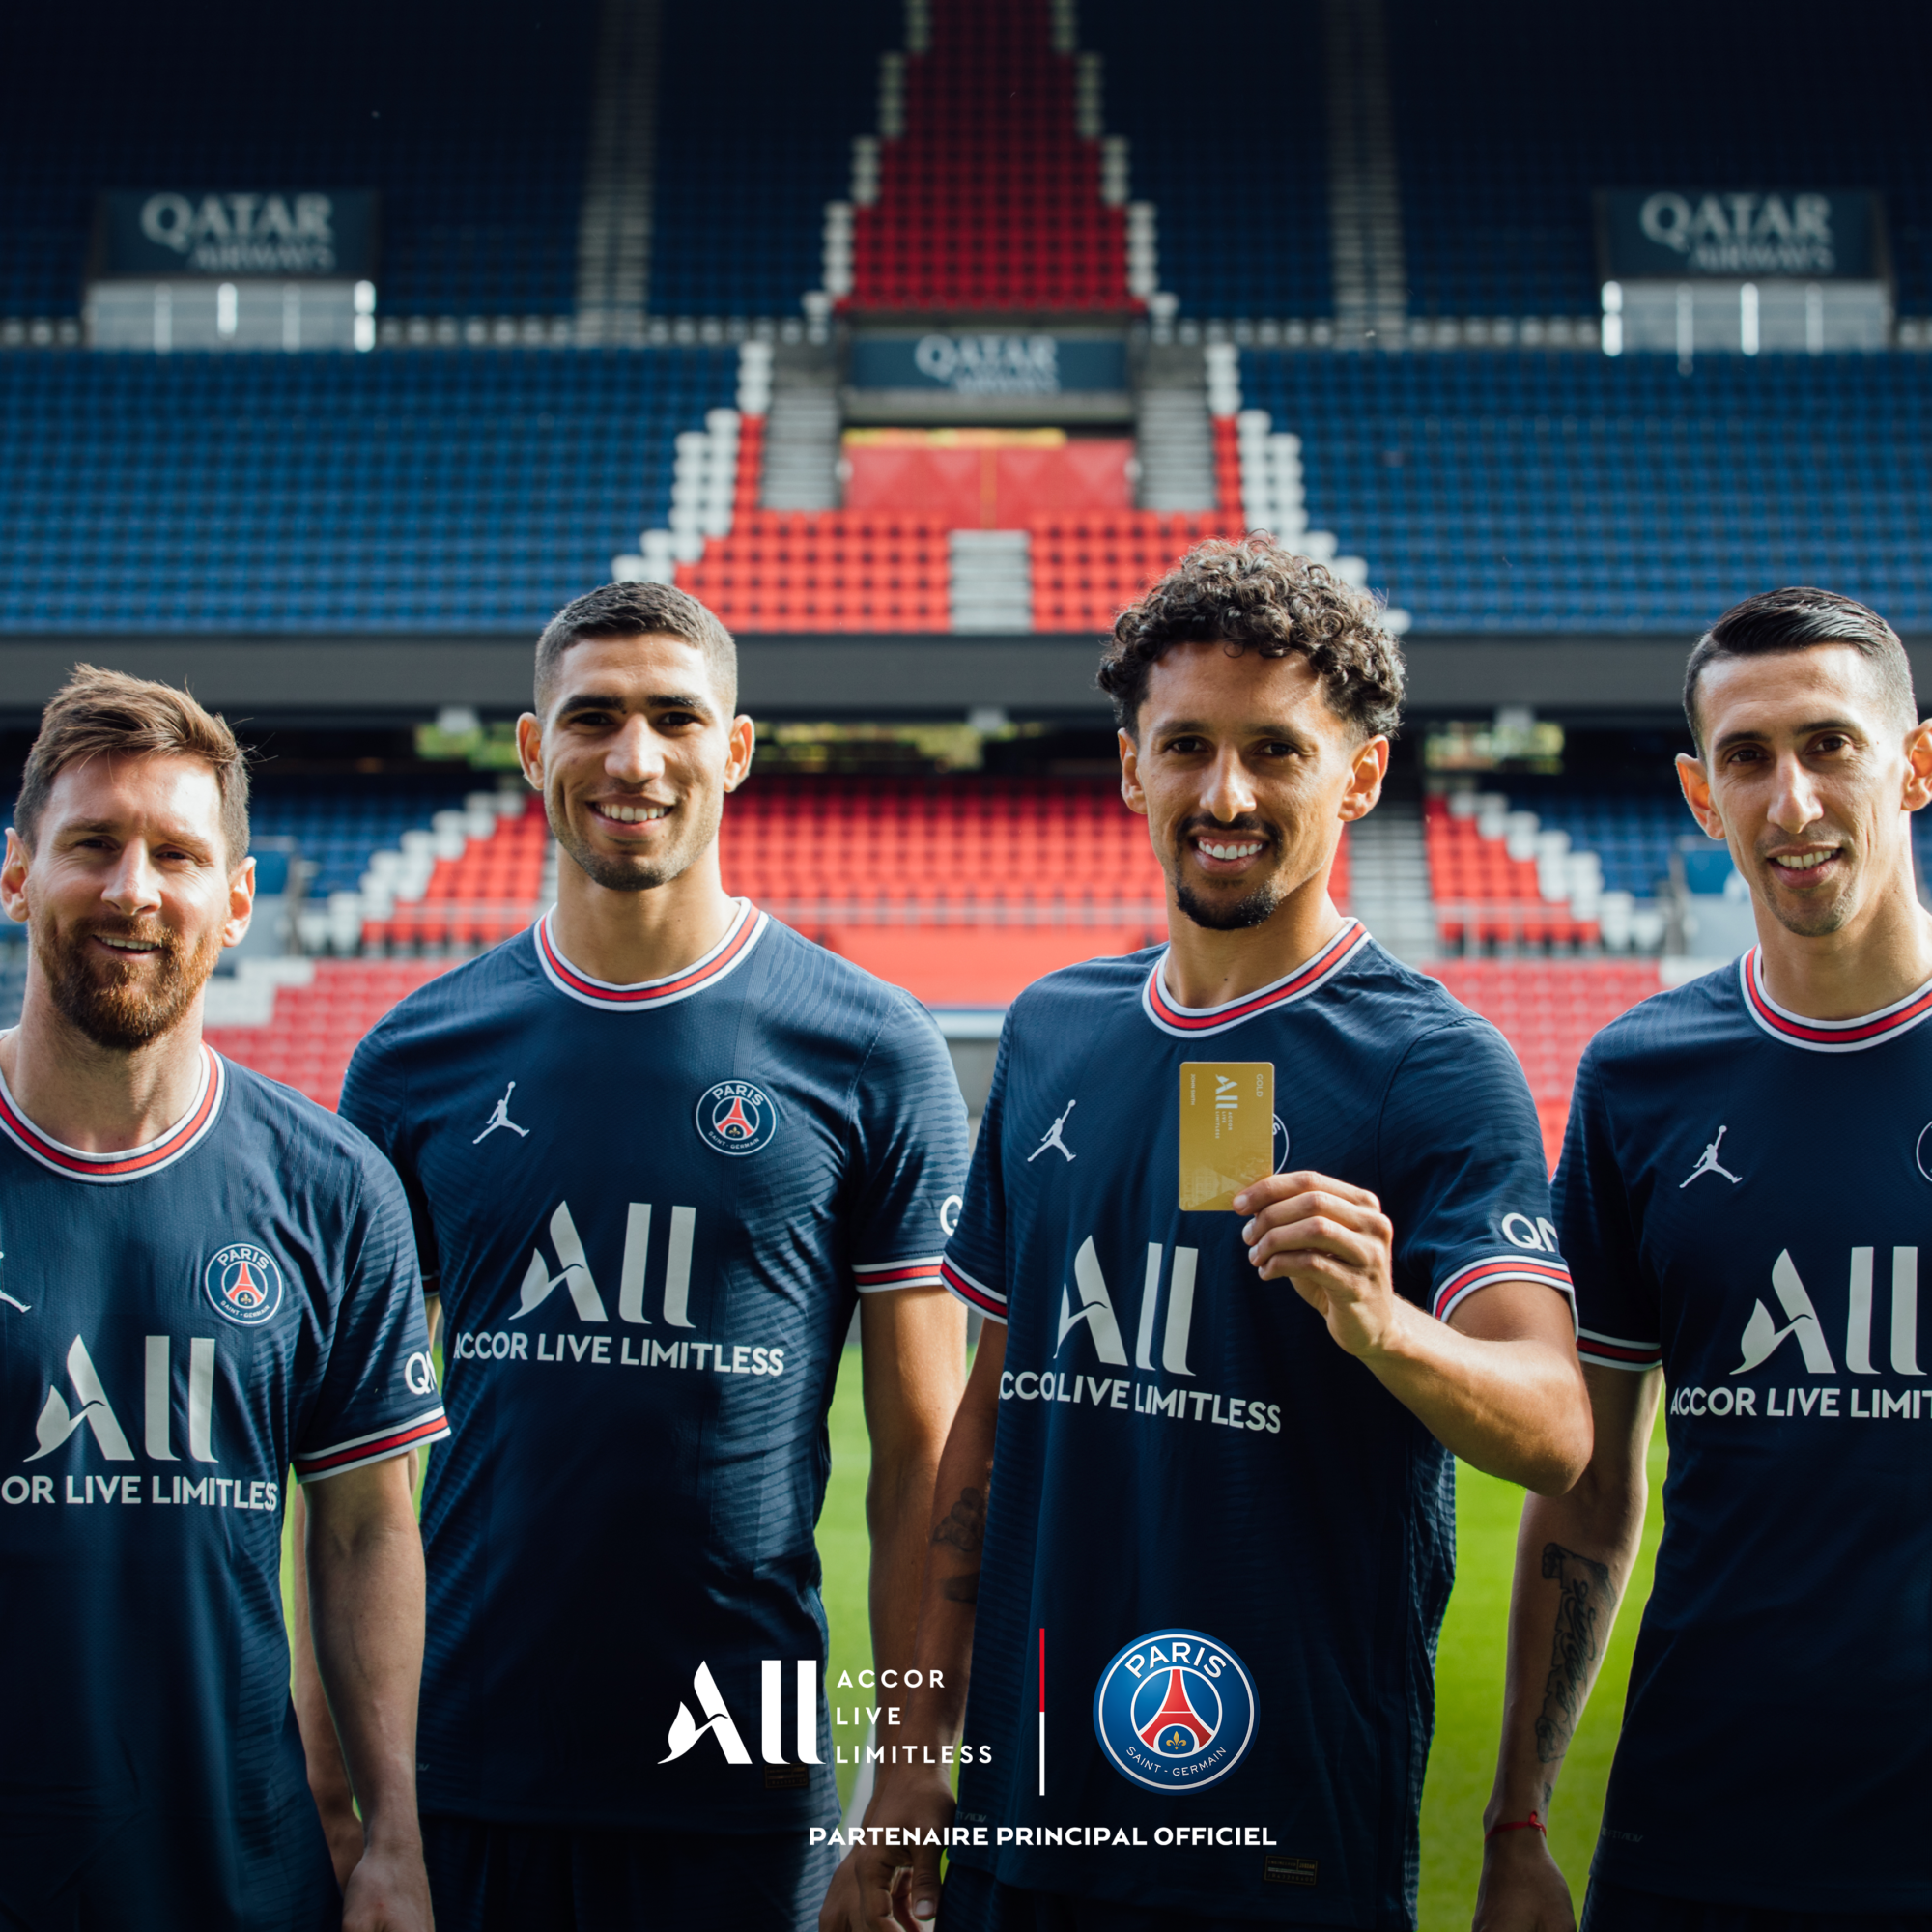 Paris Saint-Germain announce a new global flagship store in the heart of New  York City